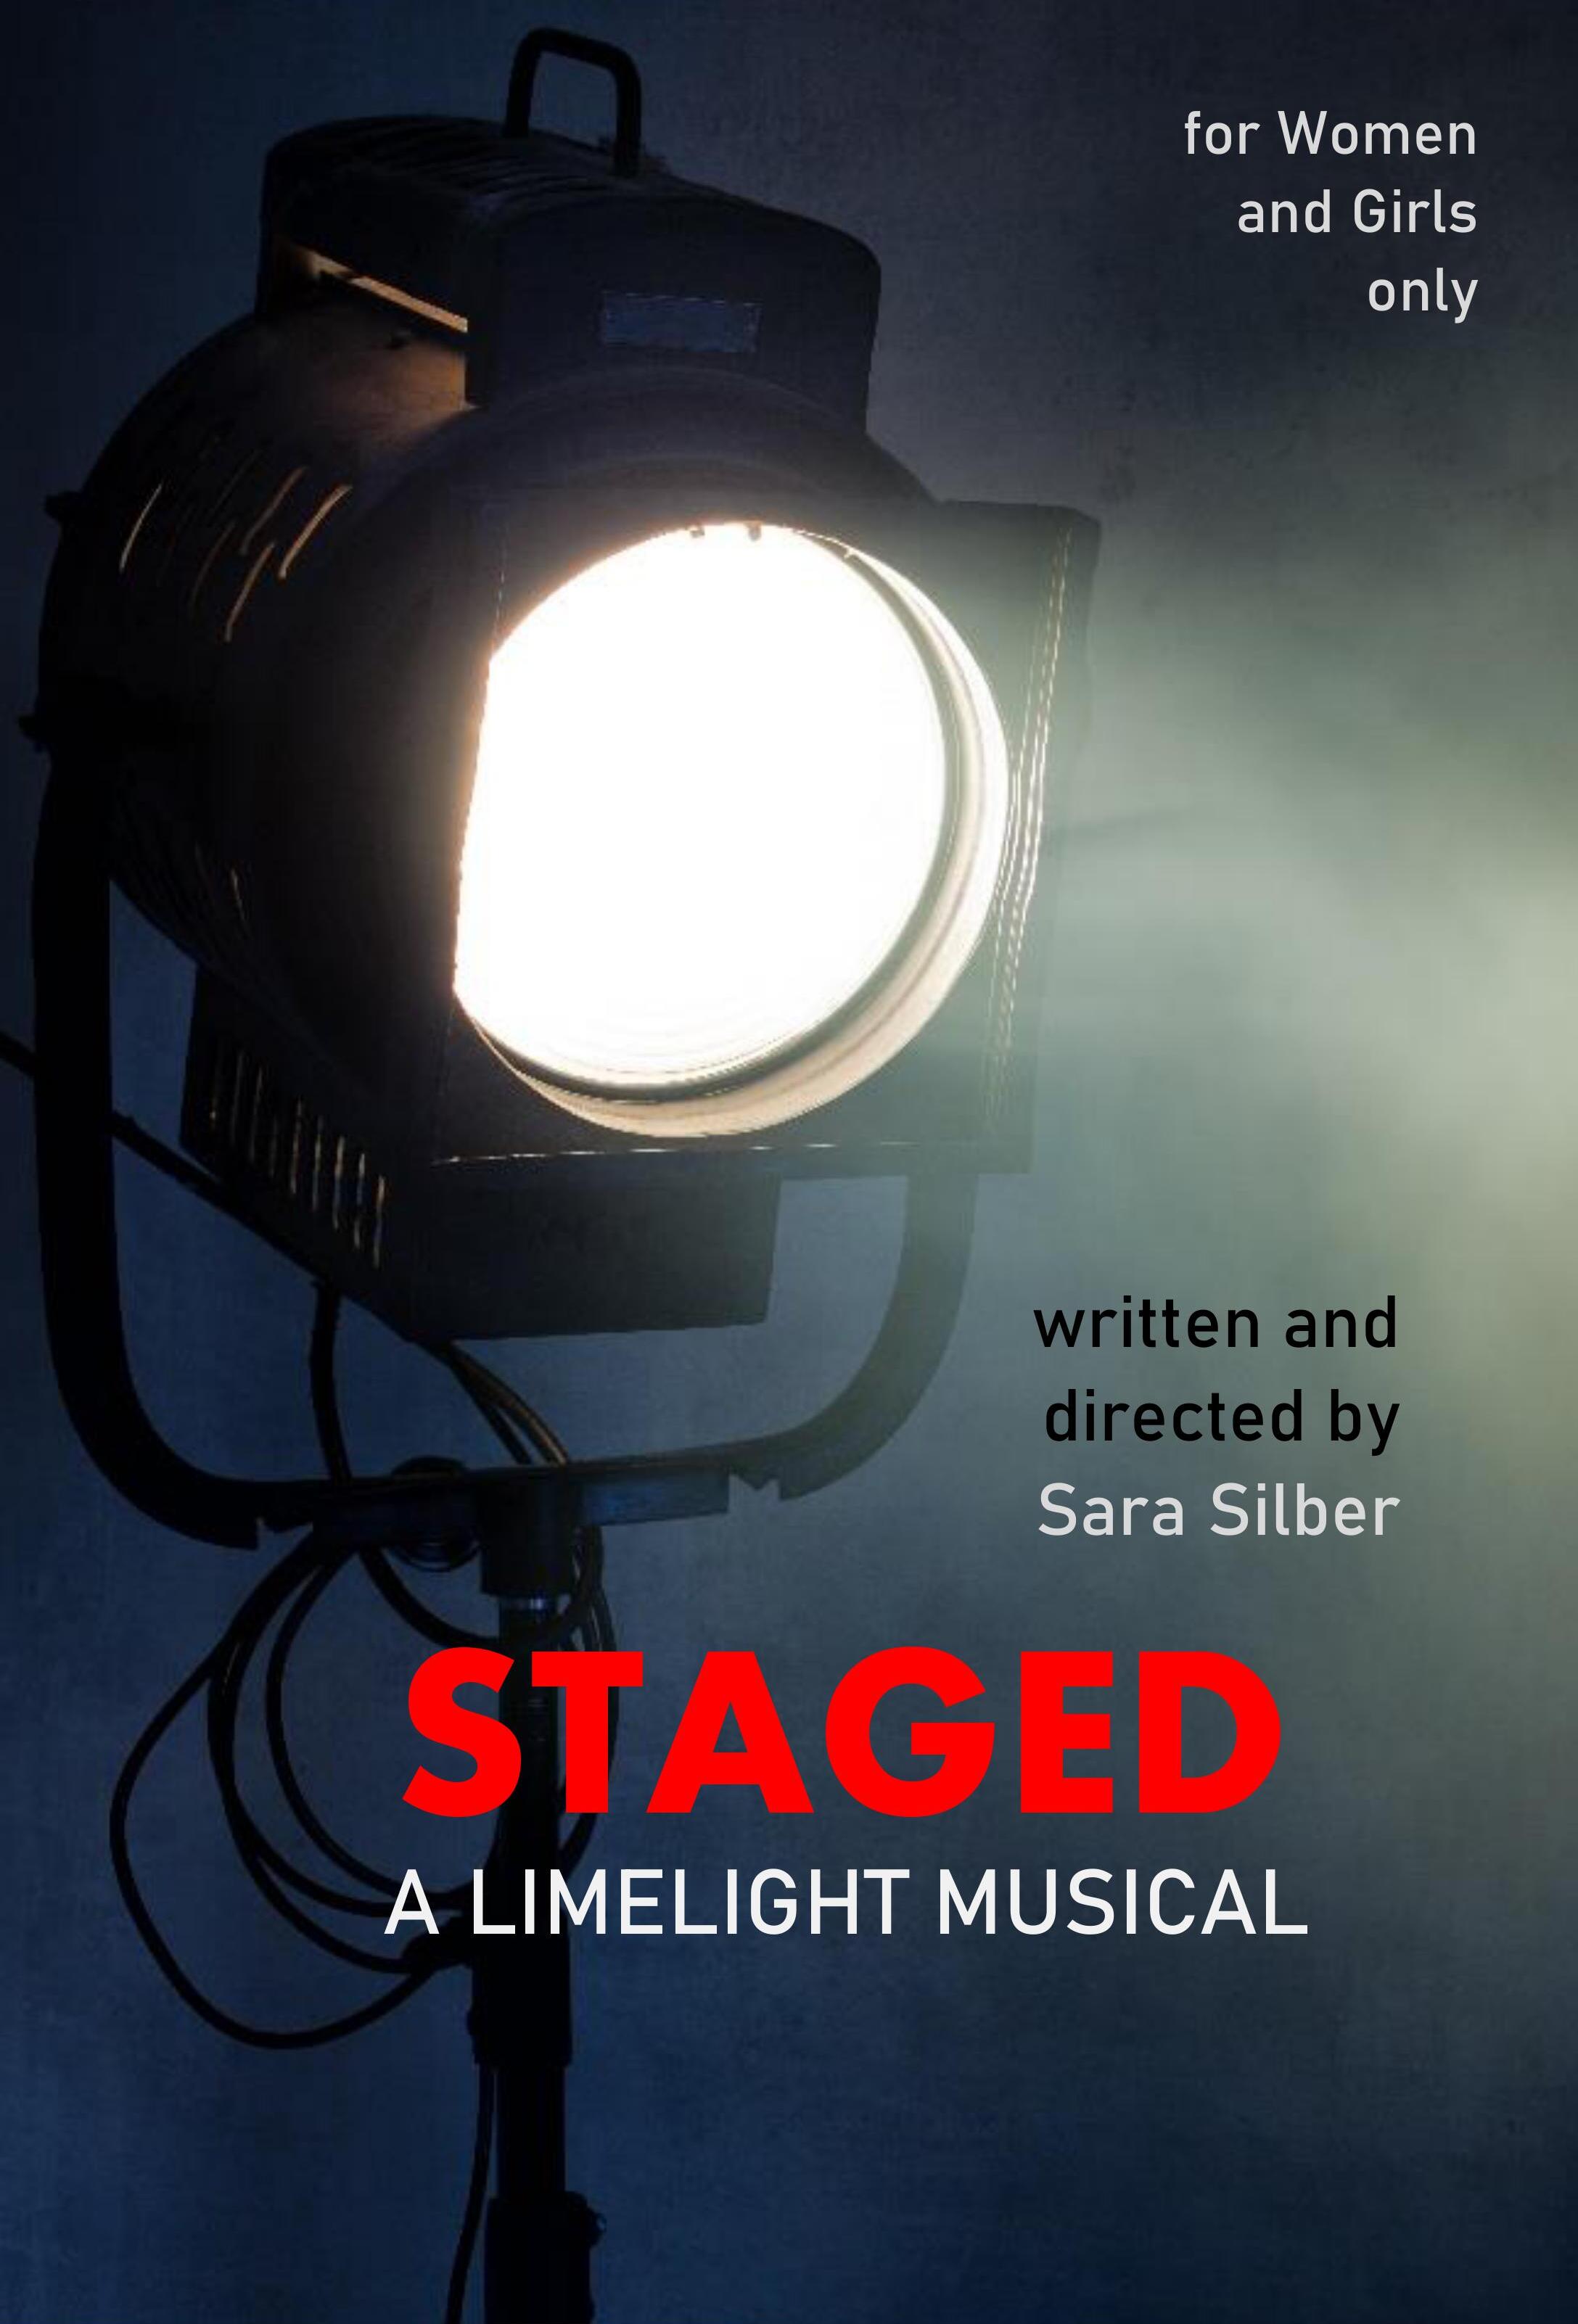 Limelight Musical - Staged (Video)